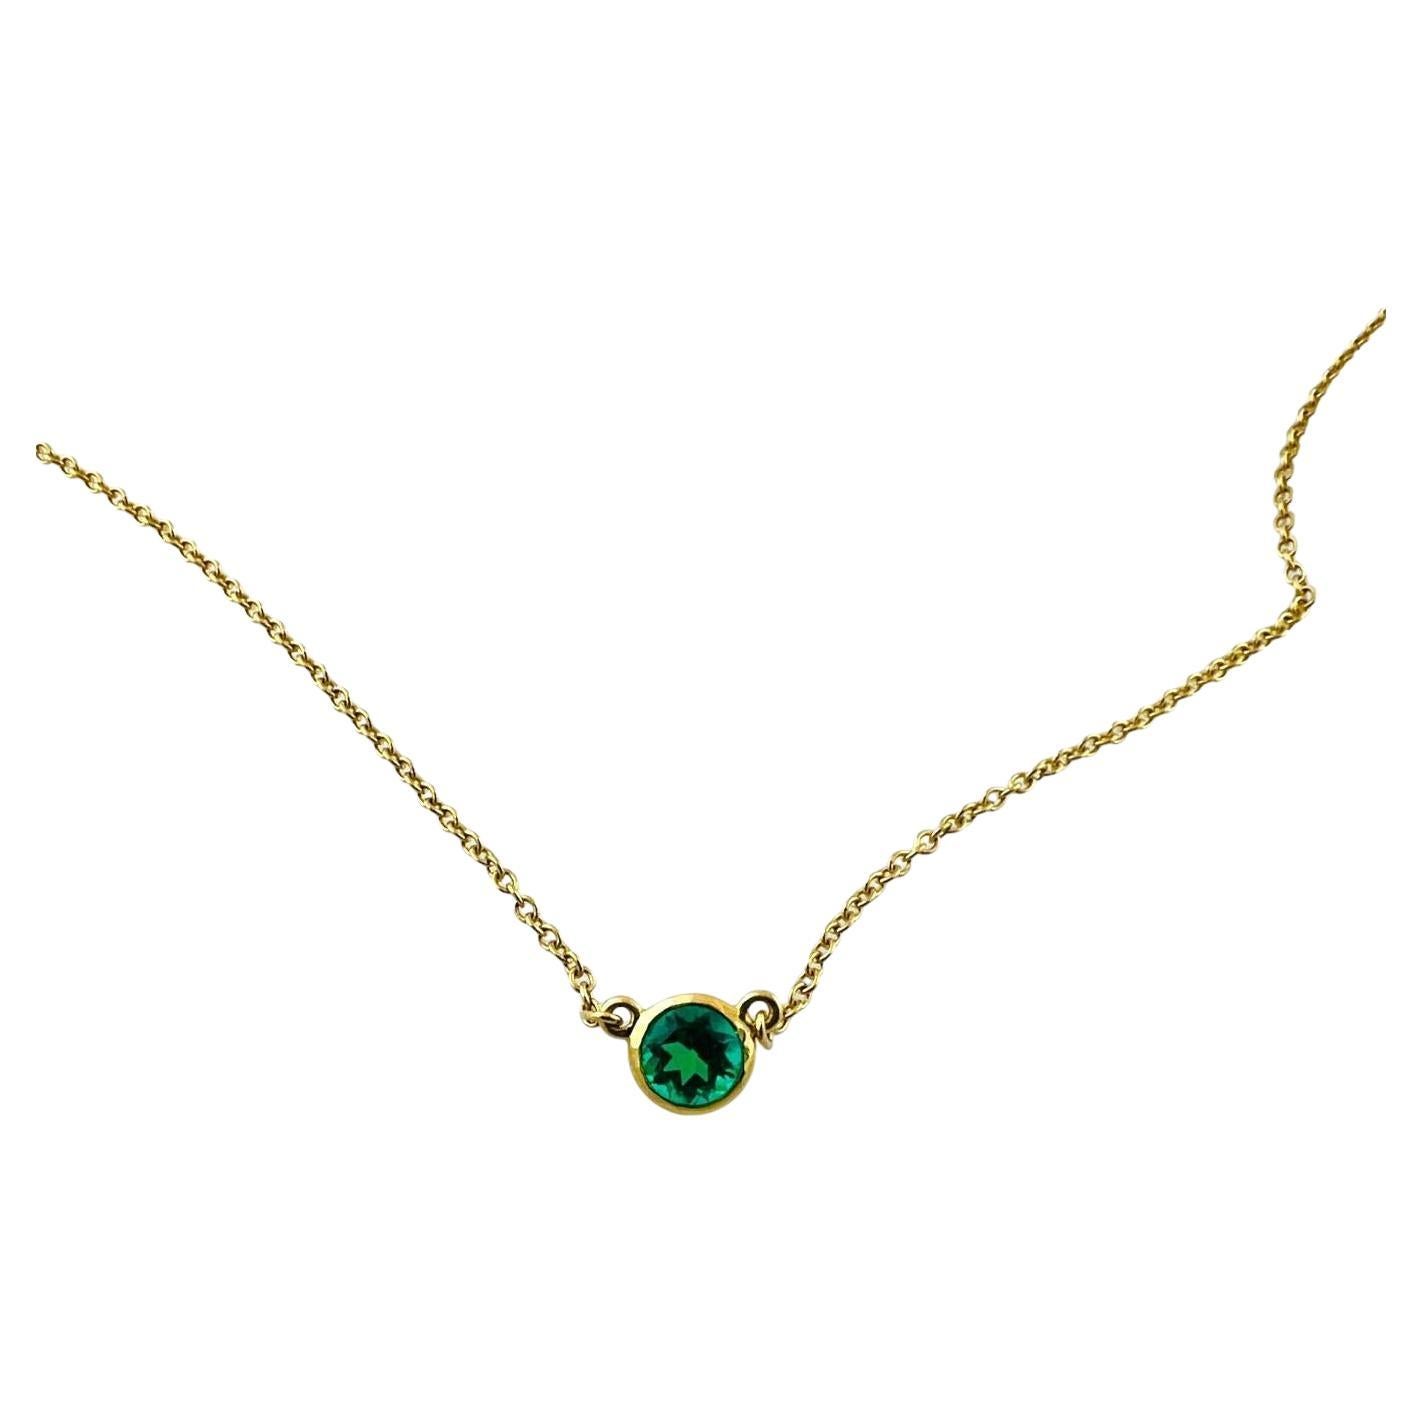 Tiffany & Co. Elsa Peretti 18K Yellow Gold Emerald Color by Yard Necklace #16316